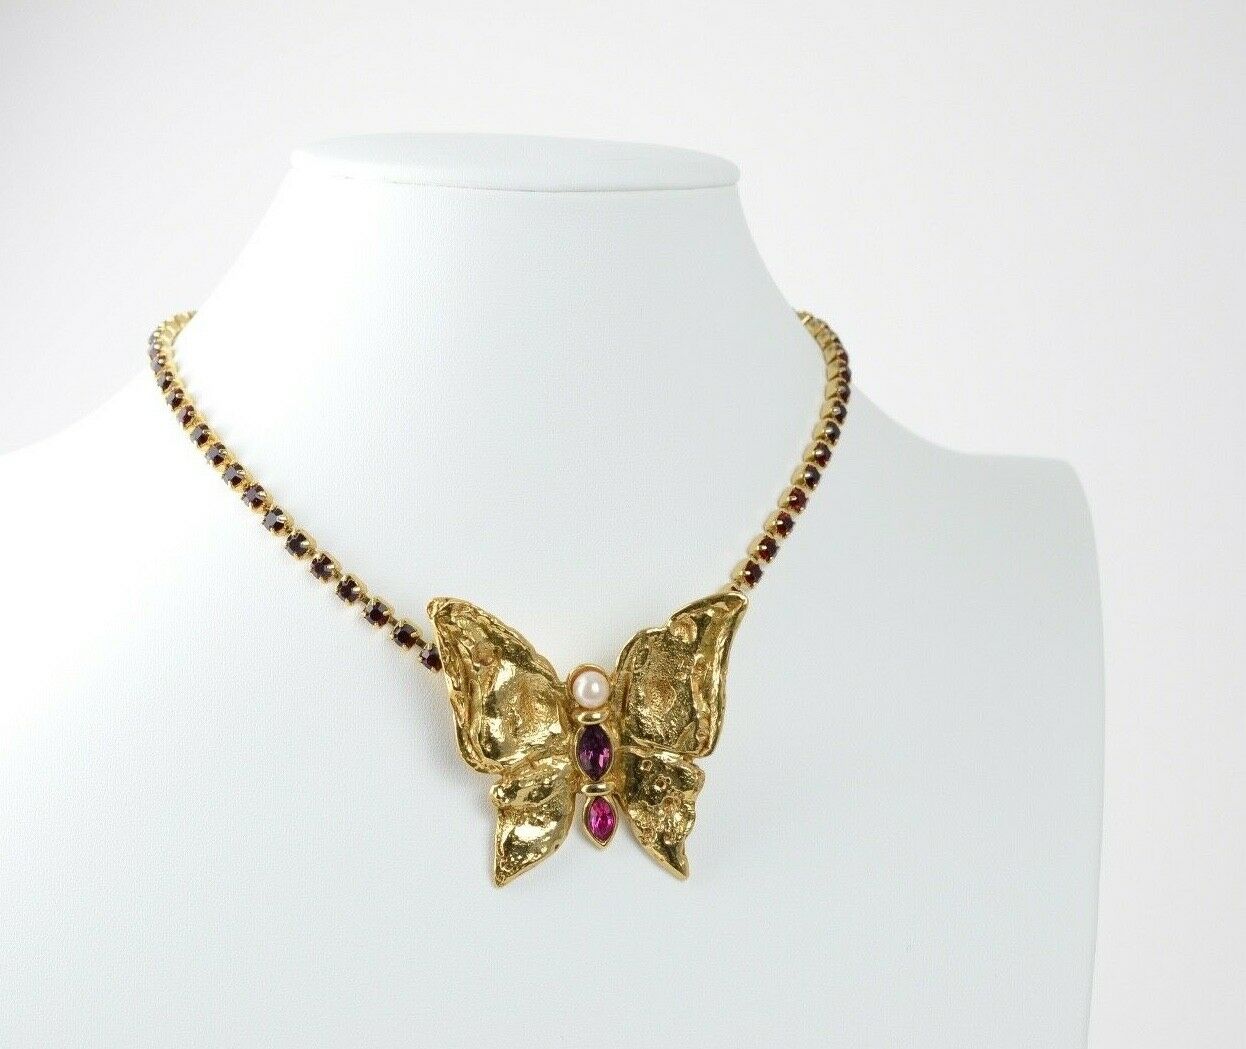 YSL Yves Saint Laurent Butterfly Vintage Pendant Choker Necklace Ruby Purple Rhinestone Made in France